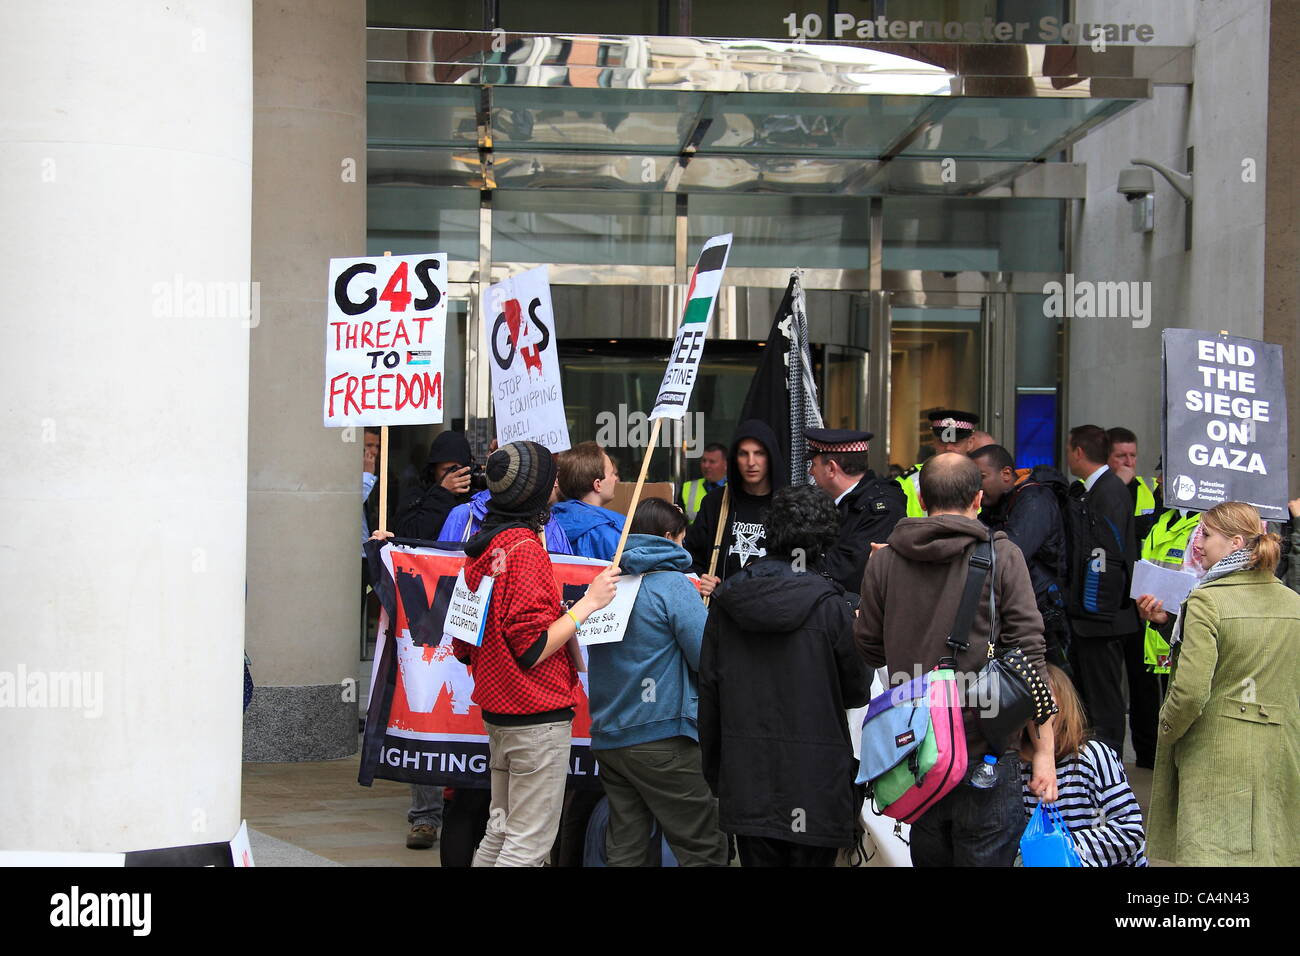 London, UK. 7th June 2012. Protesters with signs. Activists from different movements gathered out side London Stock Exchange, Paternoster Square, London where the private security company 'G4S' held the Annual General Meeting. Protesters accuse G4S of human rights abuse throughout the world. Stock Photo